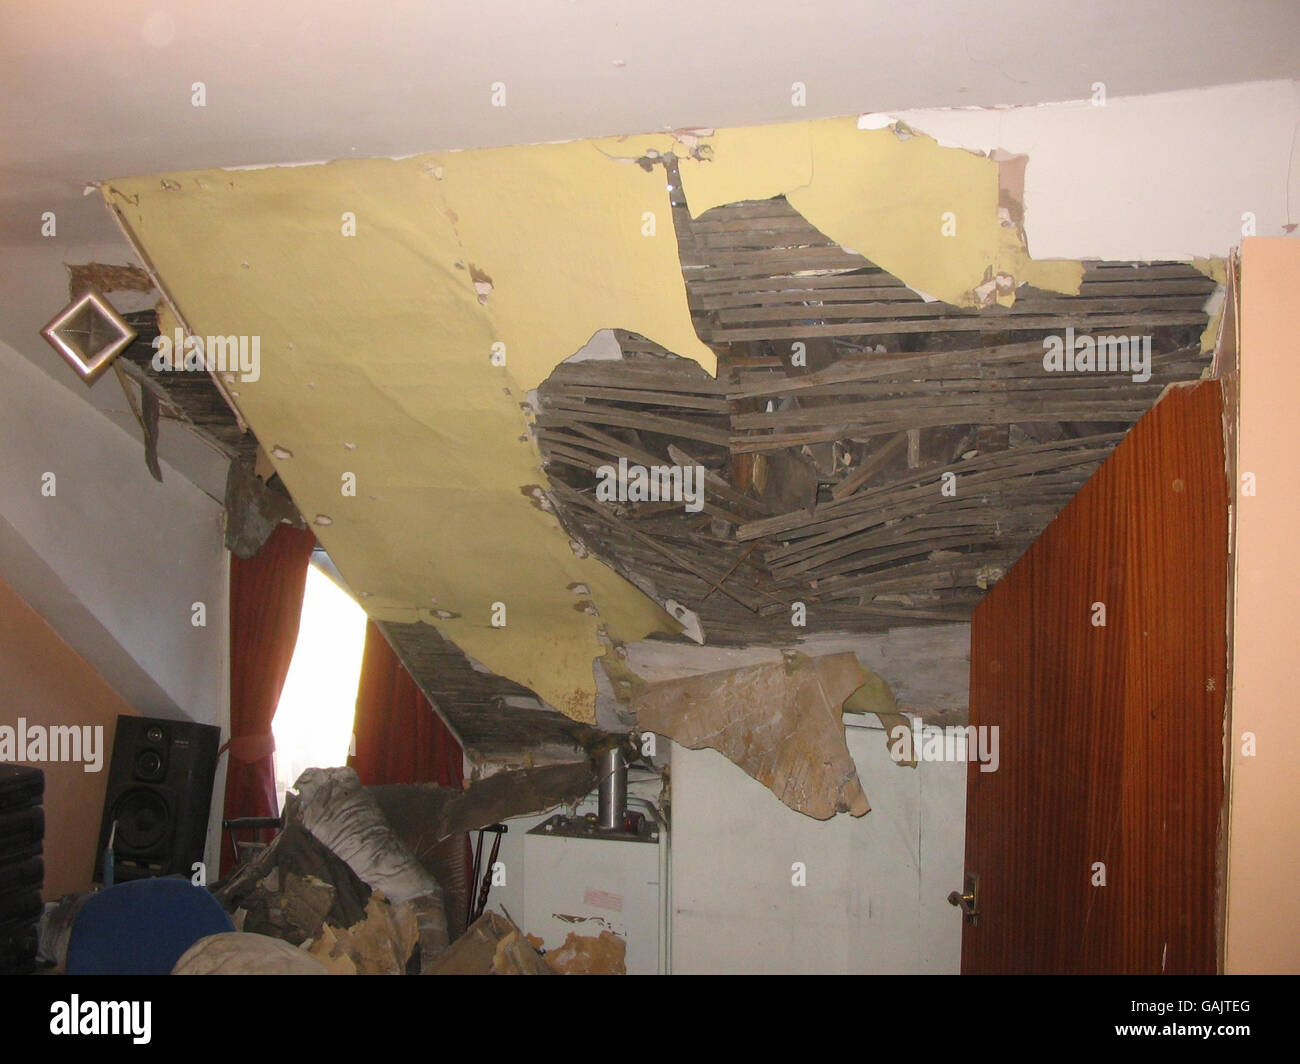 Damage done to the attic of Kleber Afonso's house in Wombwell, Barnsley after earthquake with a magnitude of 5.2 (ML) on the Richter scale near Market Rasen, Lincolnshire at 00:56 GMT. Stock Photo